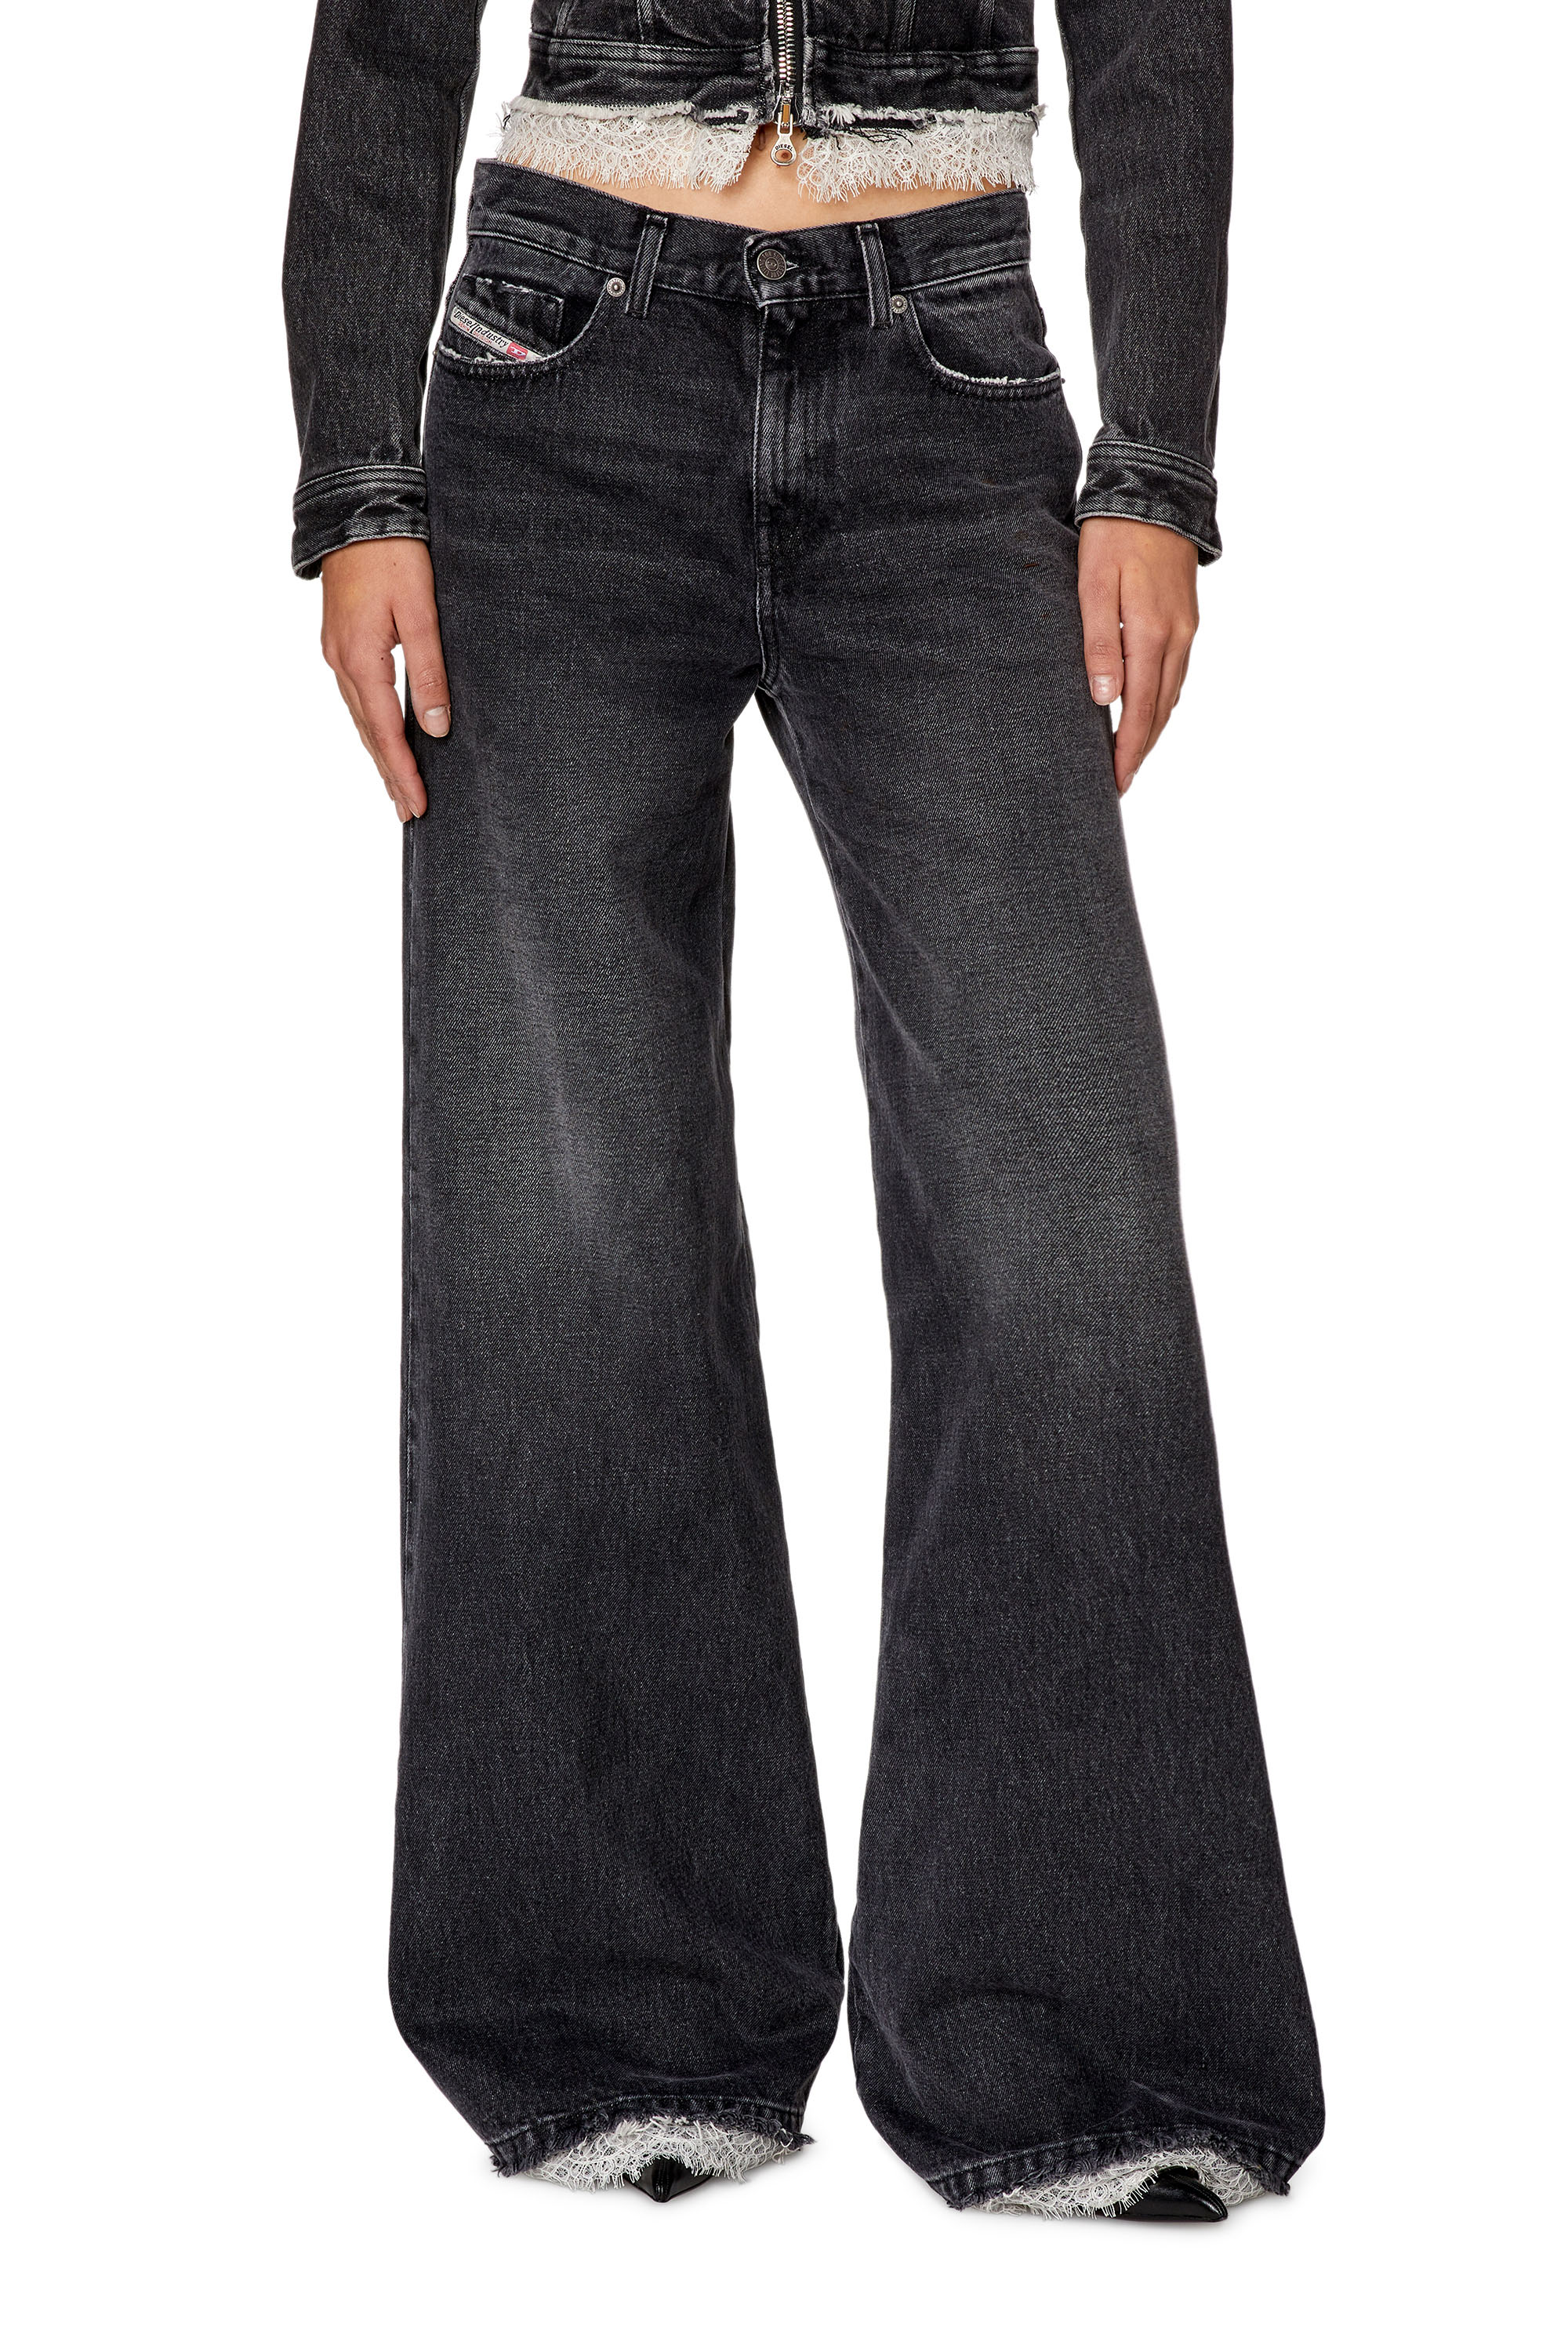 Bootcut and Flare Jeans 1978 D-Akemi 007S2